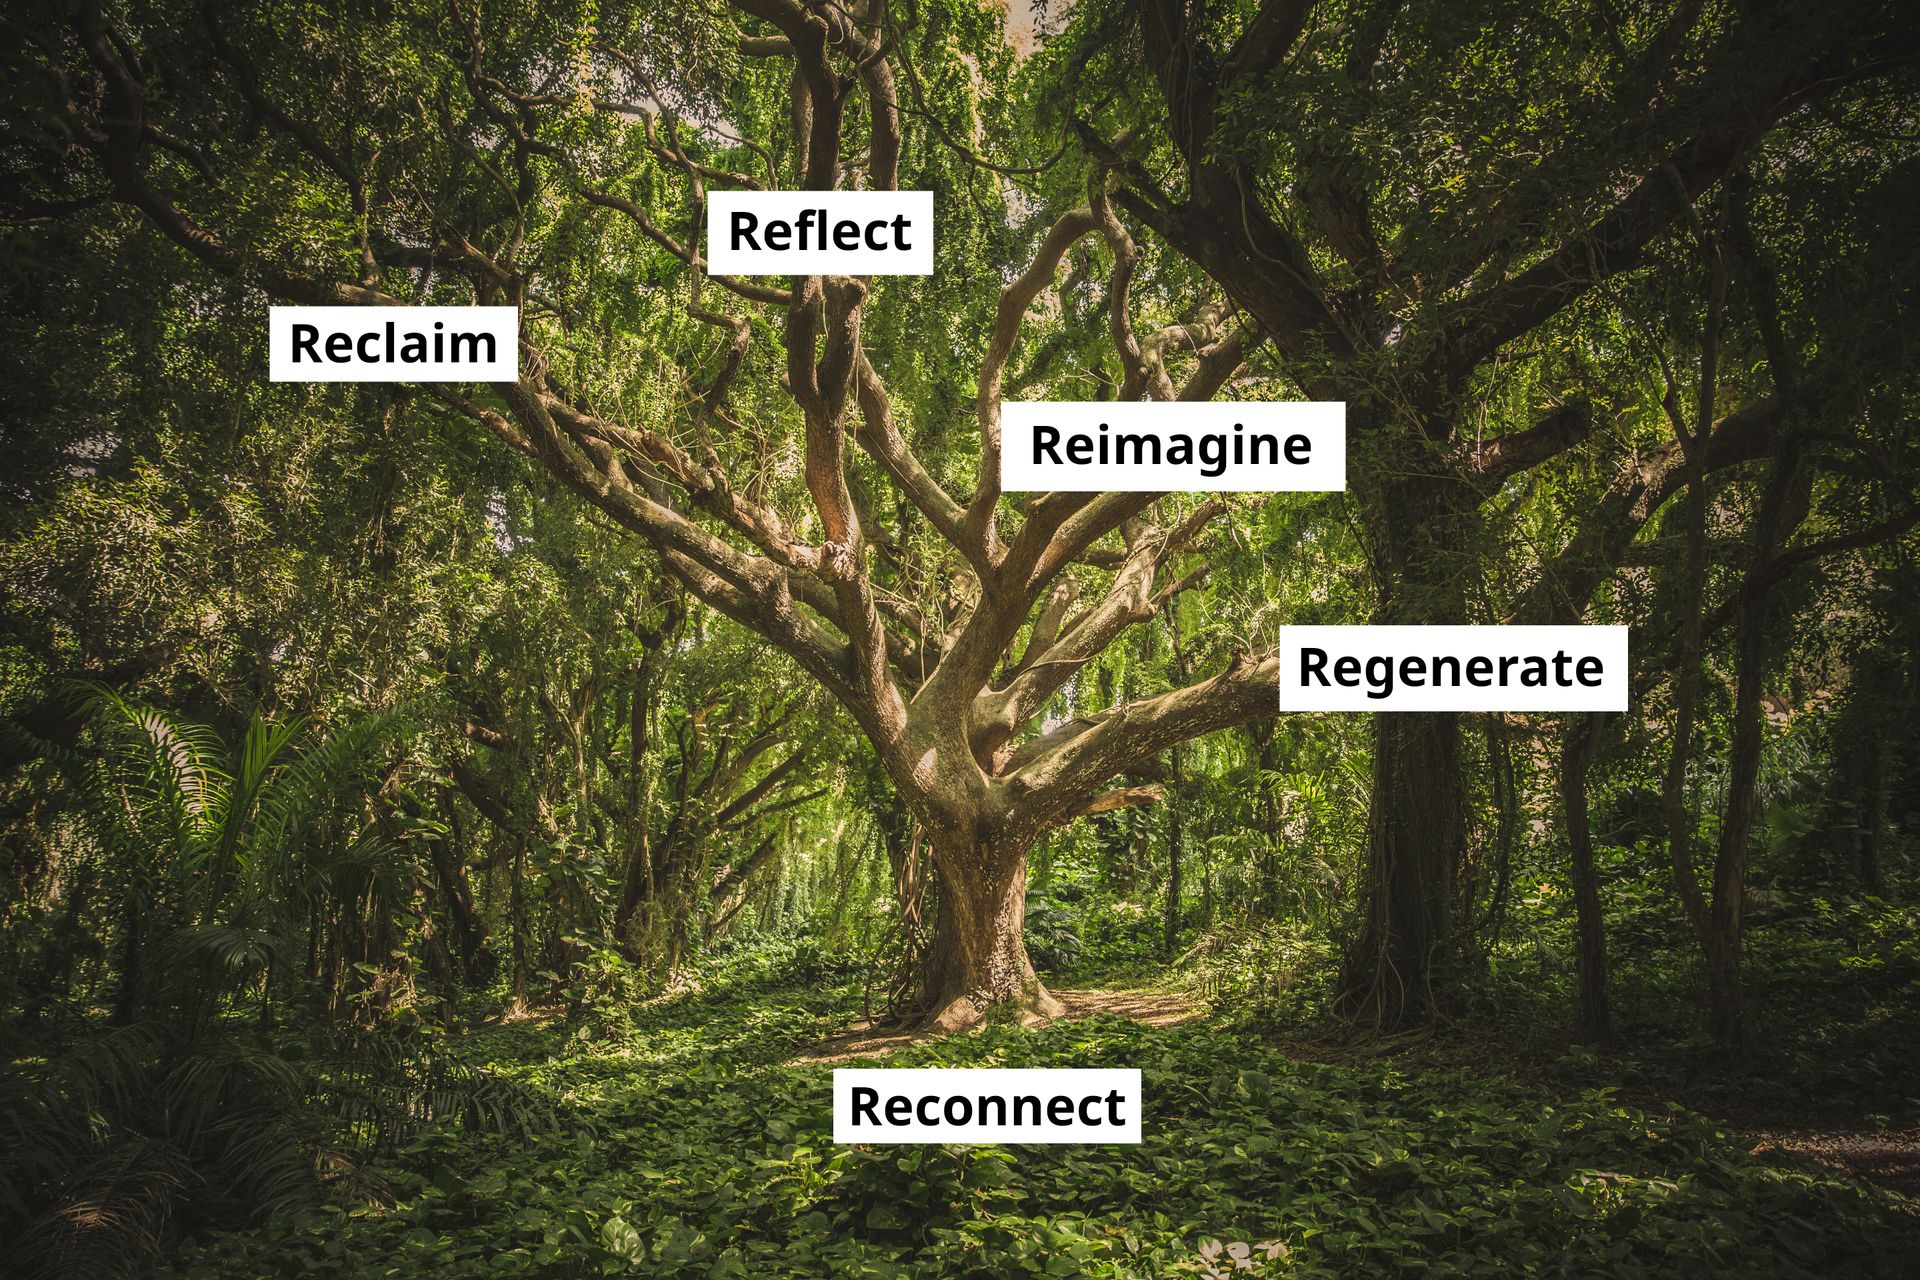 The Tree of Reconnection, featuring a lush green scenery, deep in a forest. At the center is a large tree with many branches. On each of the major branches is a text label representing the 5 branches of the Reconnect.earth process: Reclaim, Reflect, Reconnect, Reimagine and Regenerate. Of these five branches, Reconnect is actually at the root of the tree (symbolising connection to the root system).